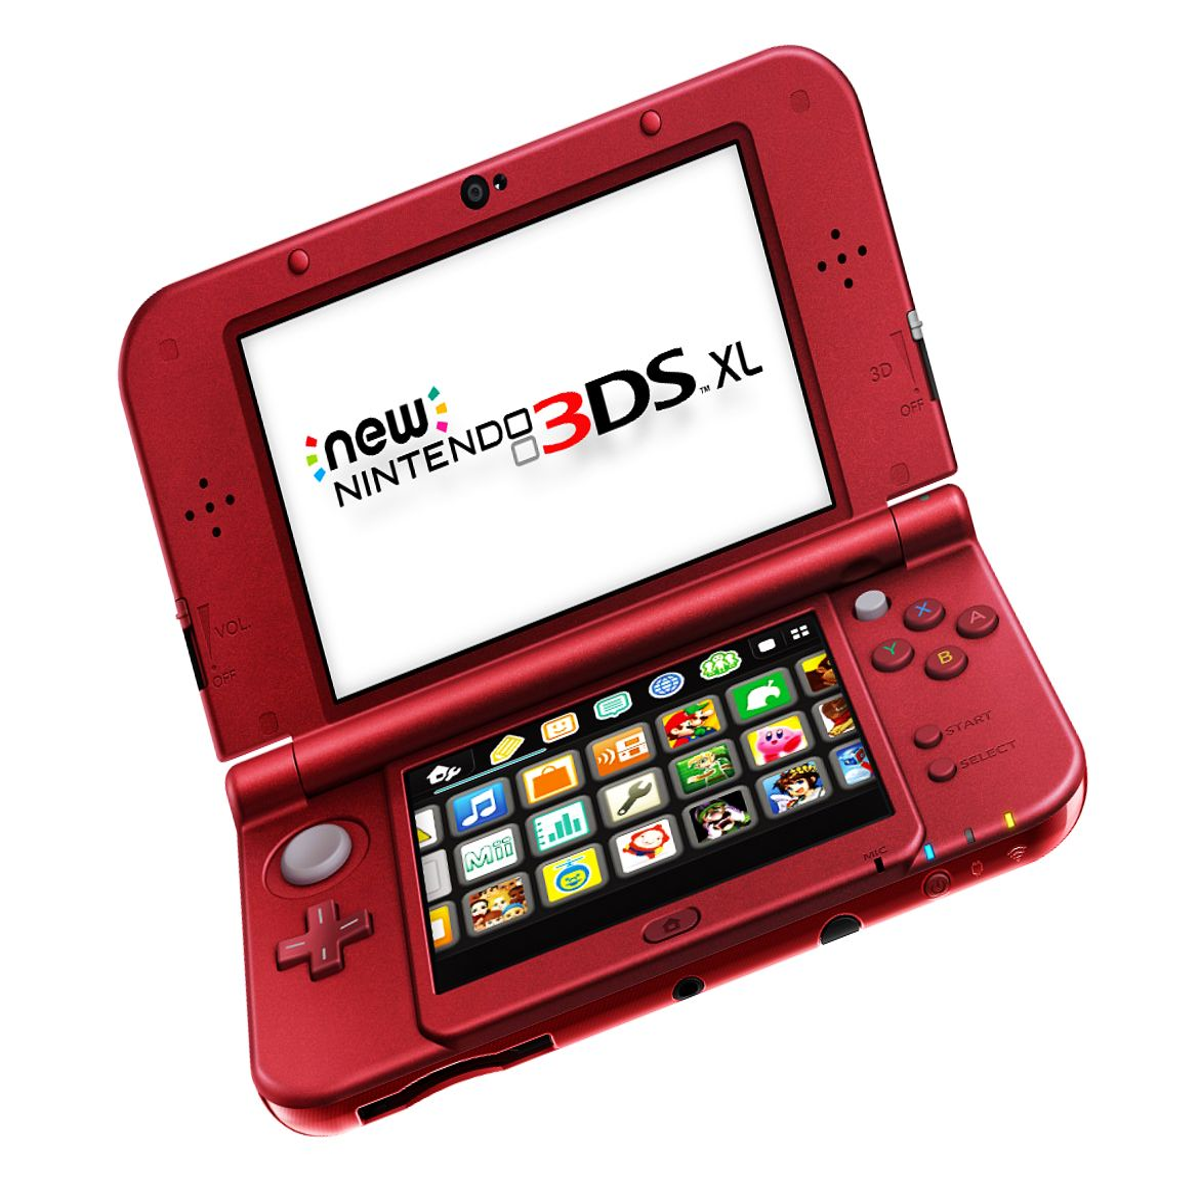 Nintendo estimates New 3DS sold over 150,000 units the US and EU | VG247